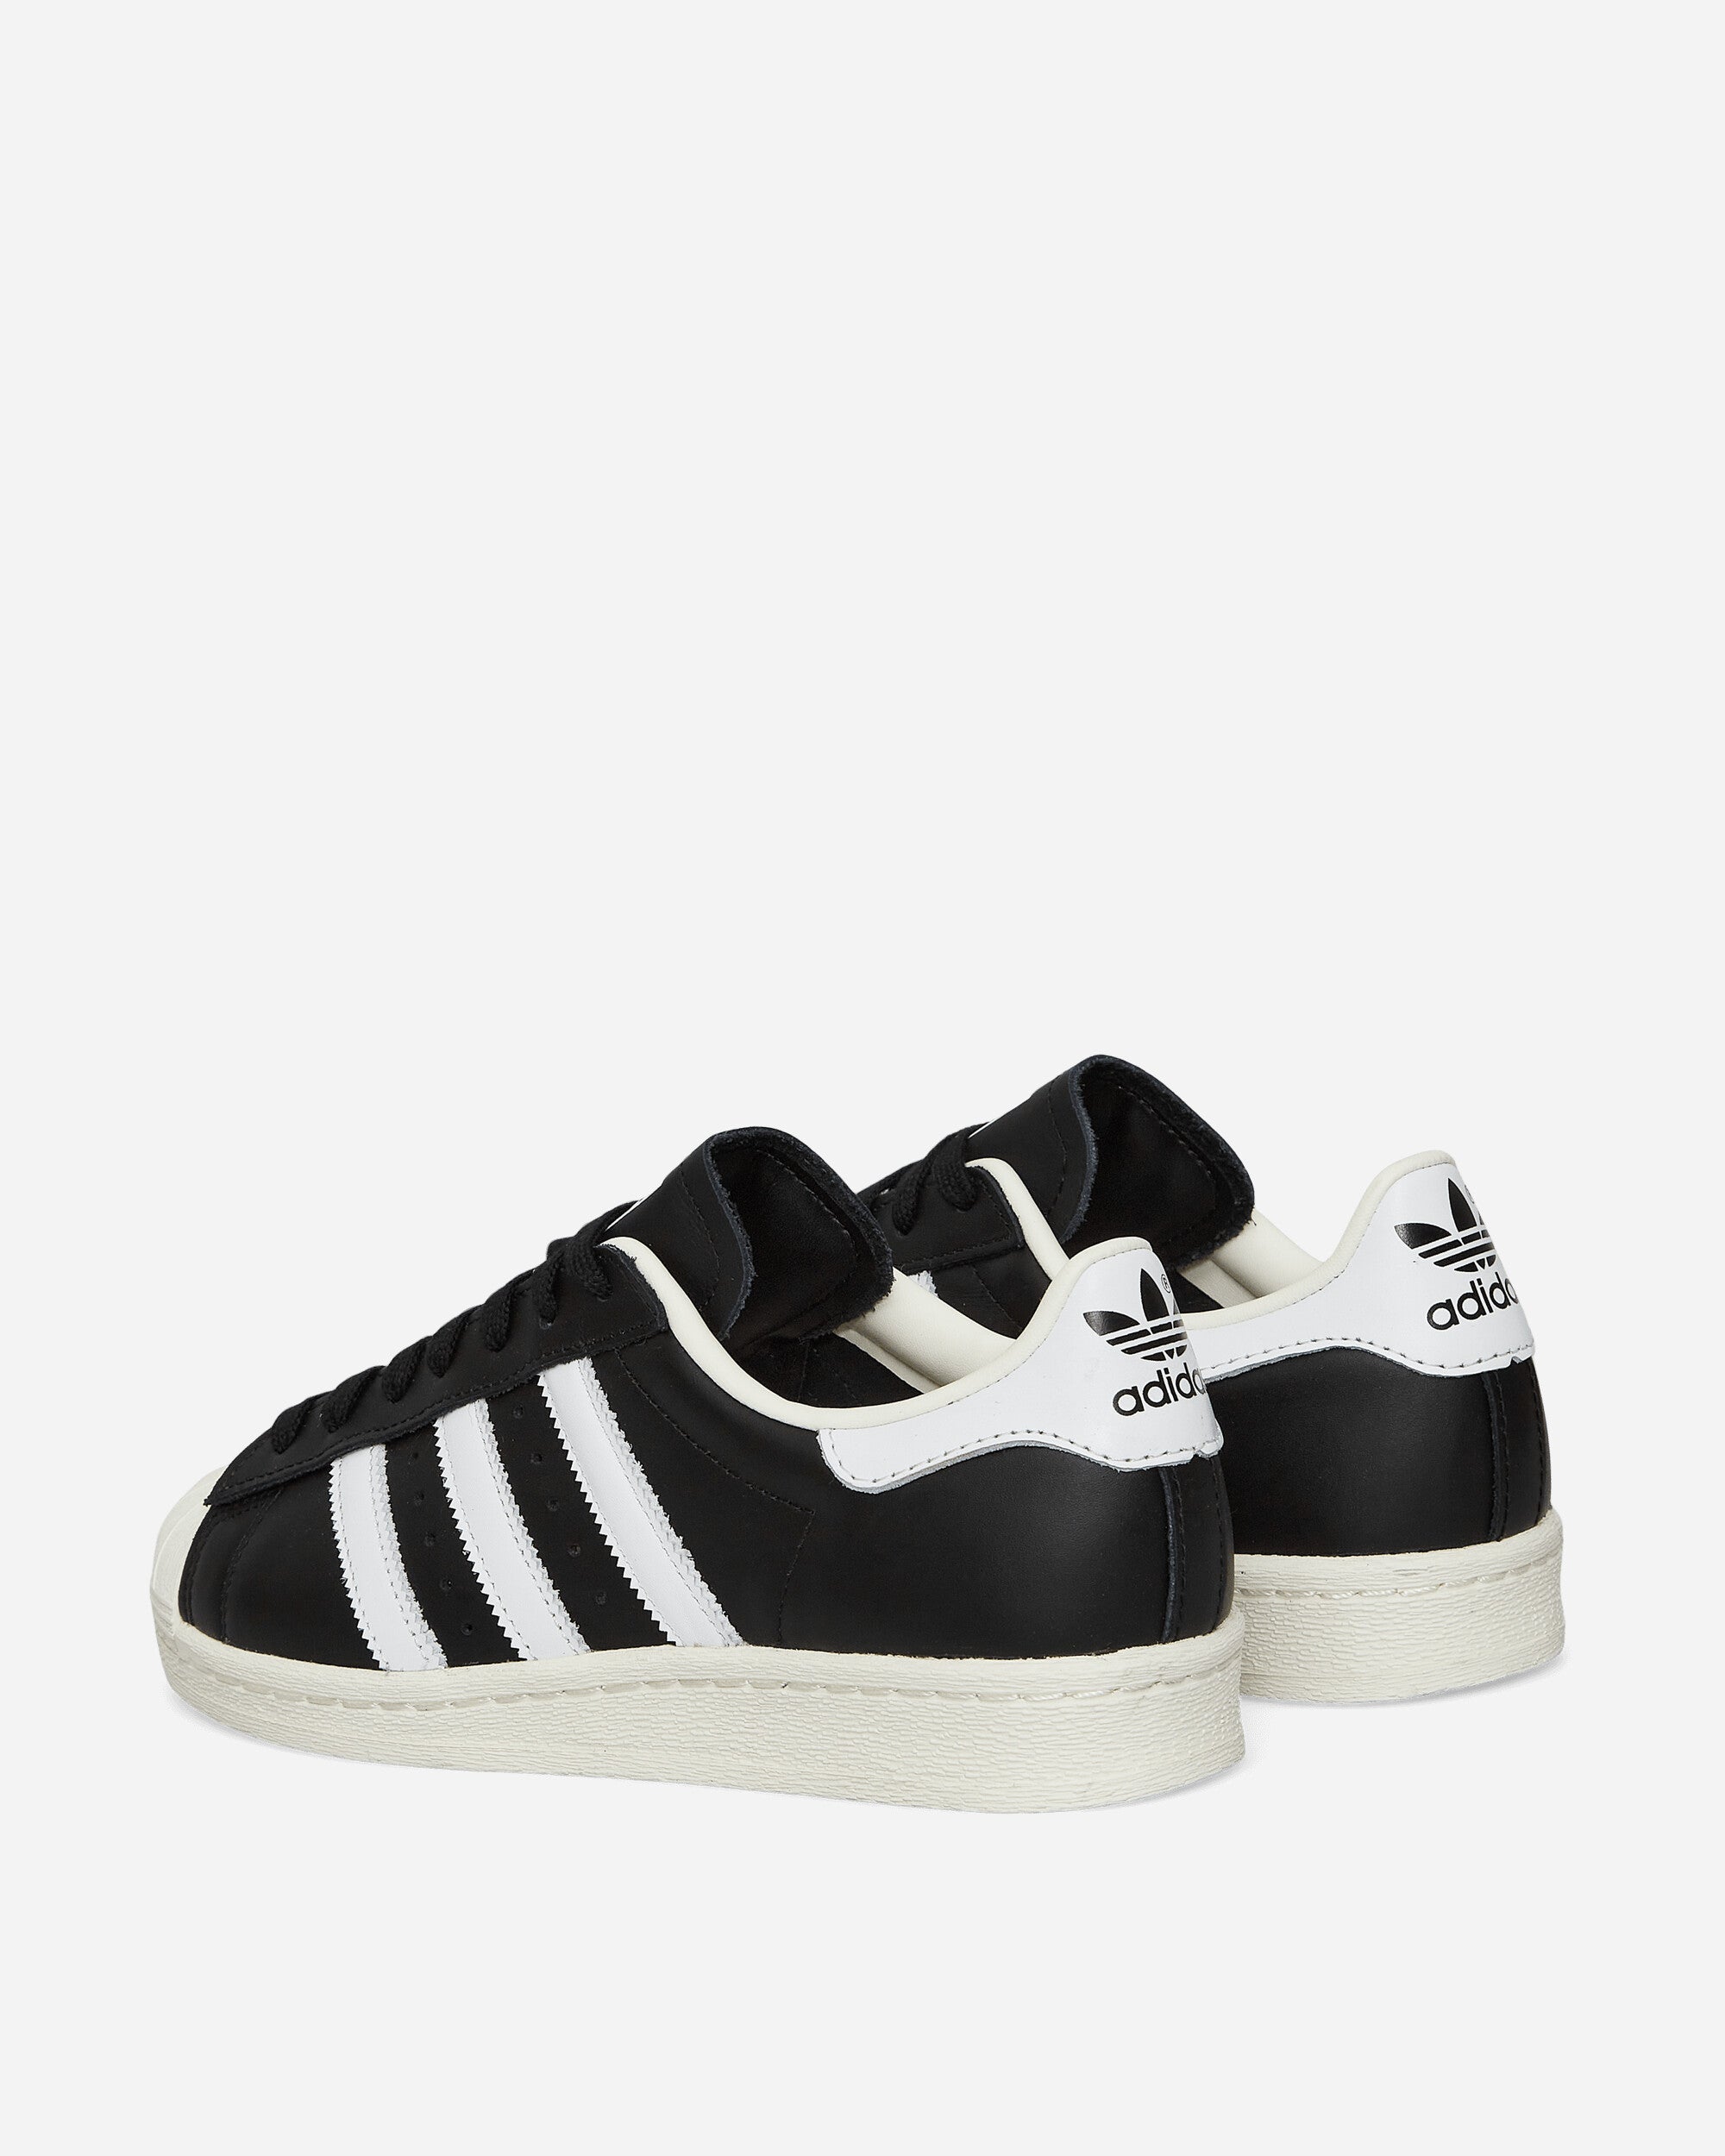 adidas Superstar 82 Core Black/Ftwr White Sneakers Low ID5960 001